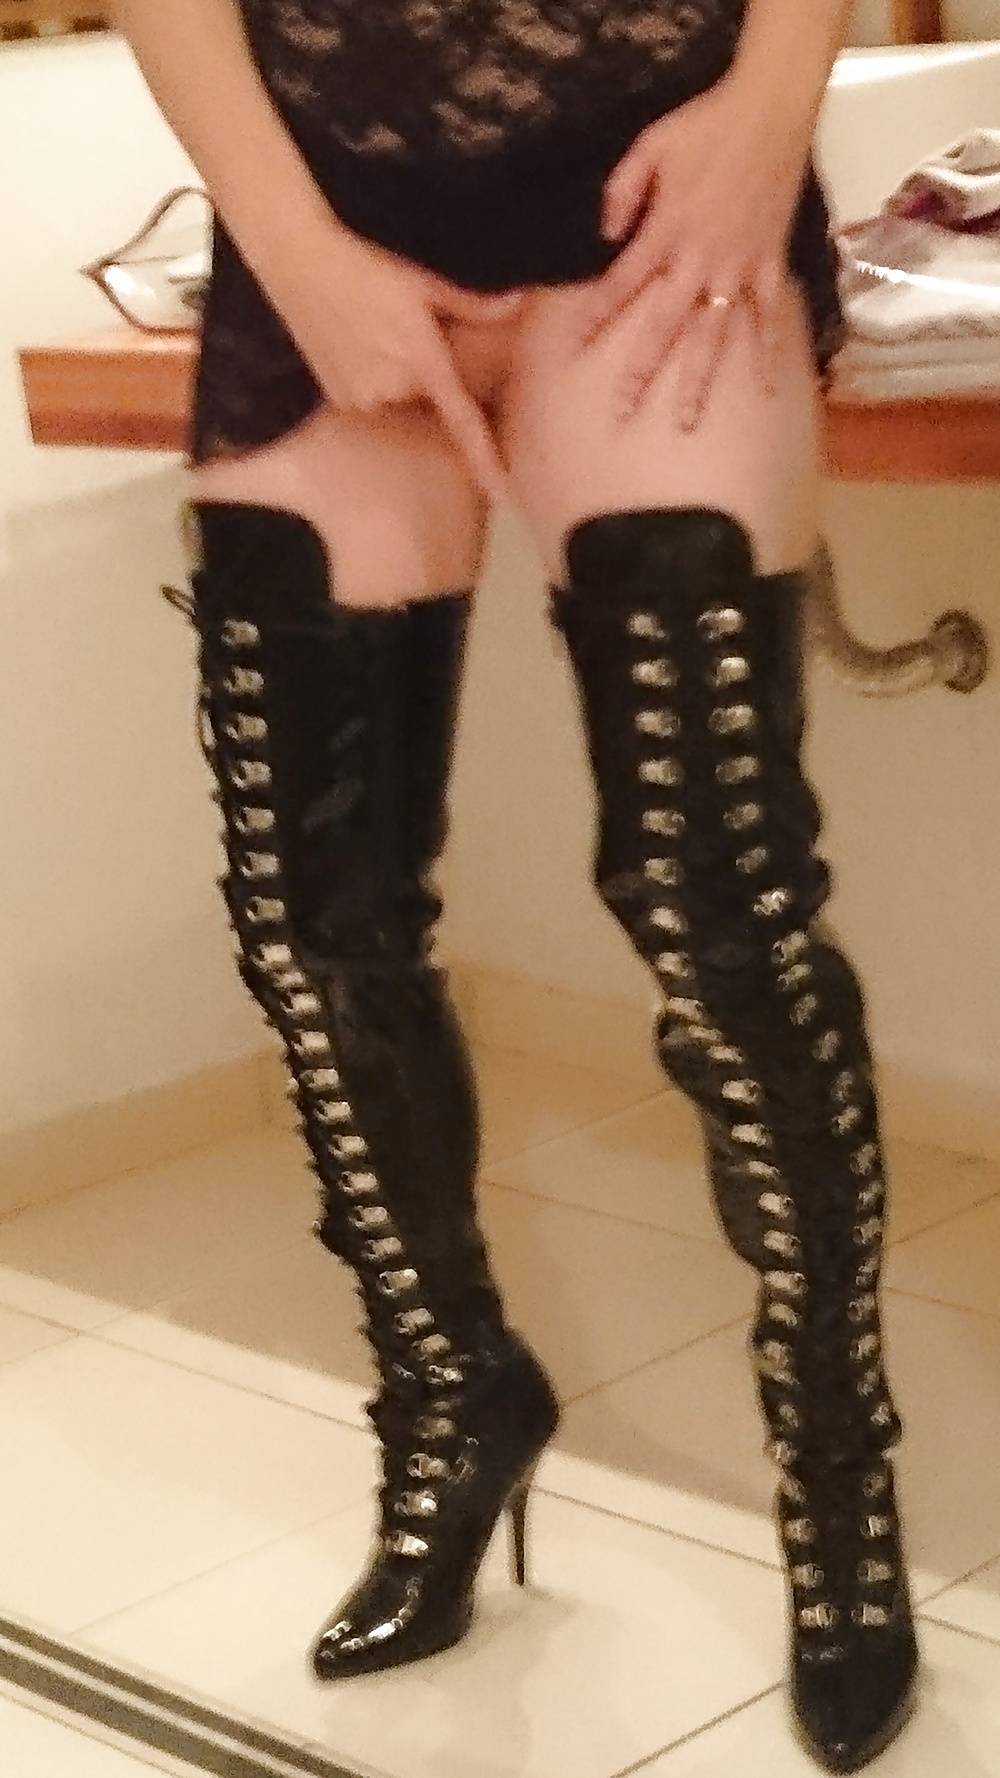 Wife_in_boots (6/9)